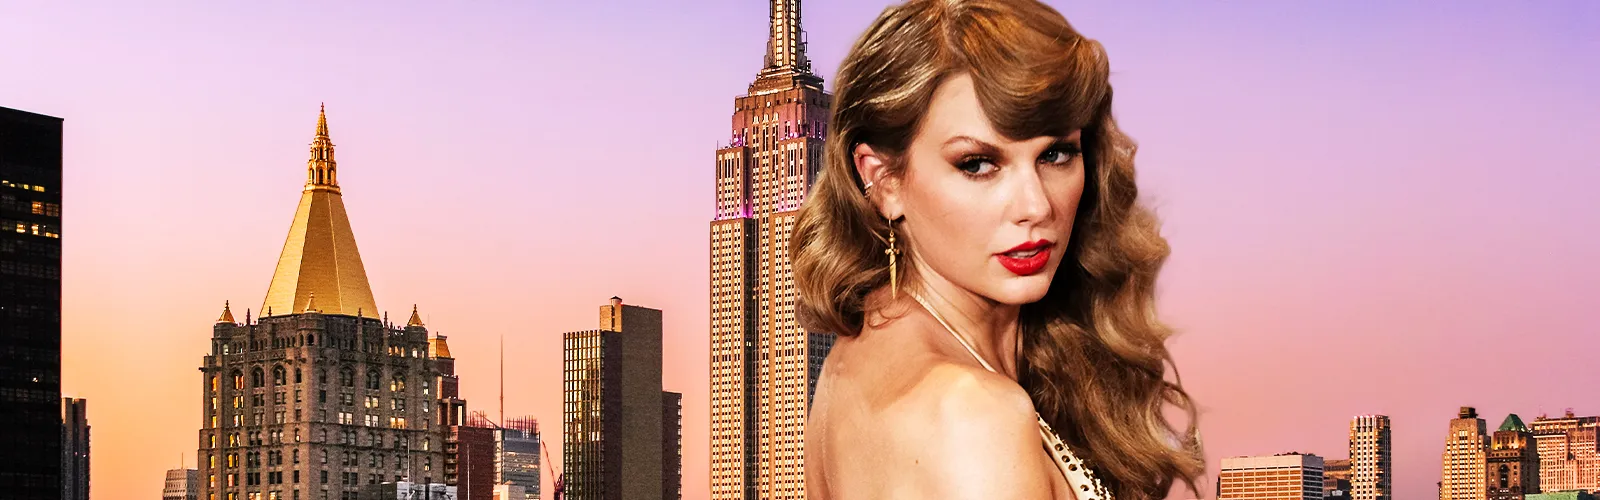 taylor-swifts-enthralling-craze-lights-up-the-empire-state-building